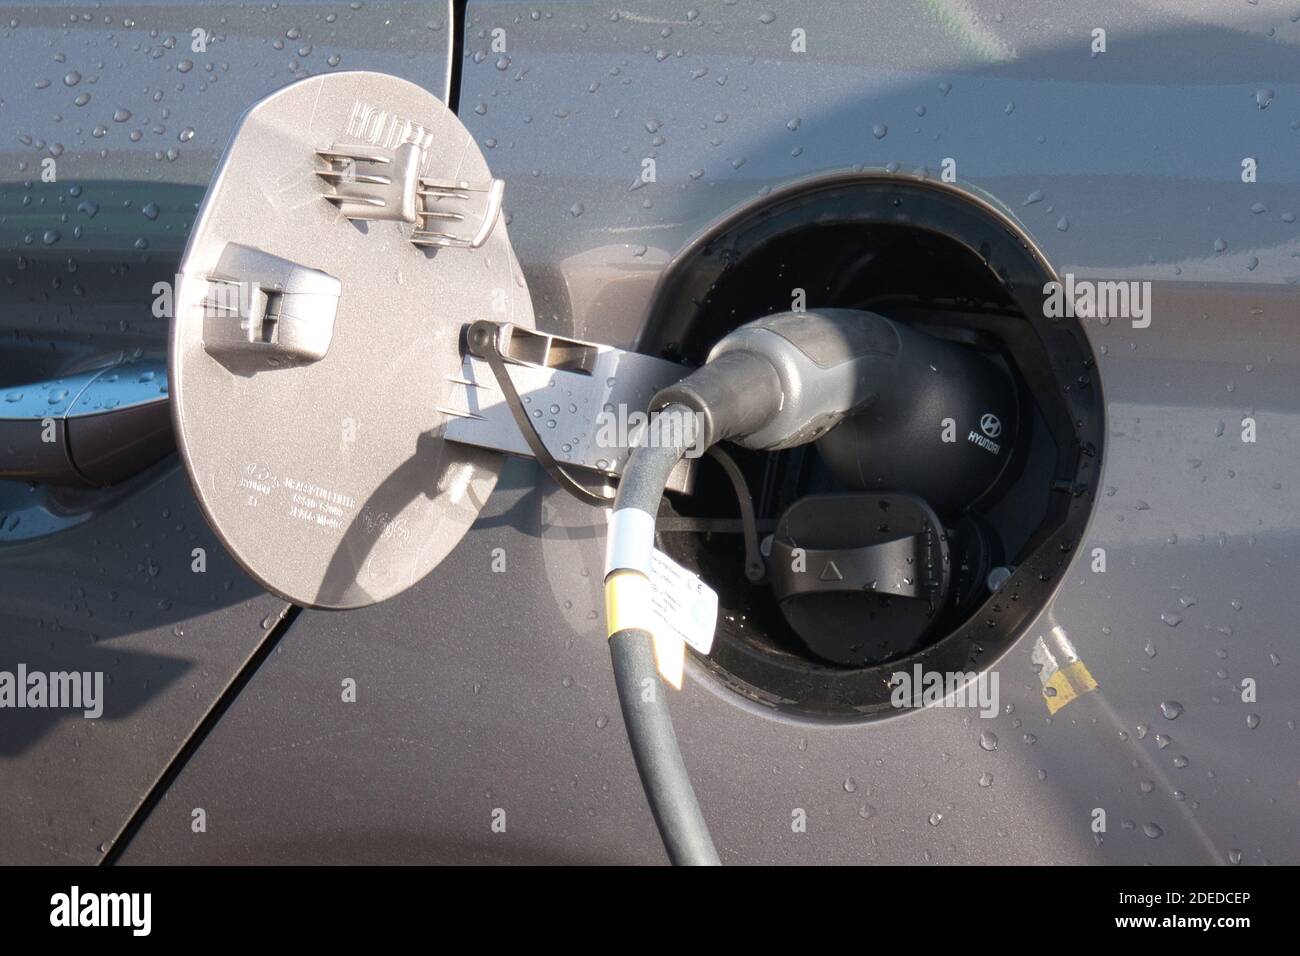 A hybrid car uses an EV (electric vehicle) charger in a supermarket car park. Stock Photo